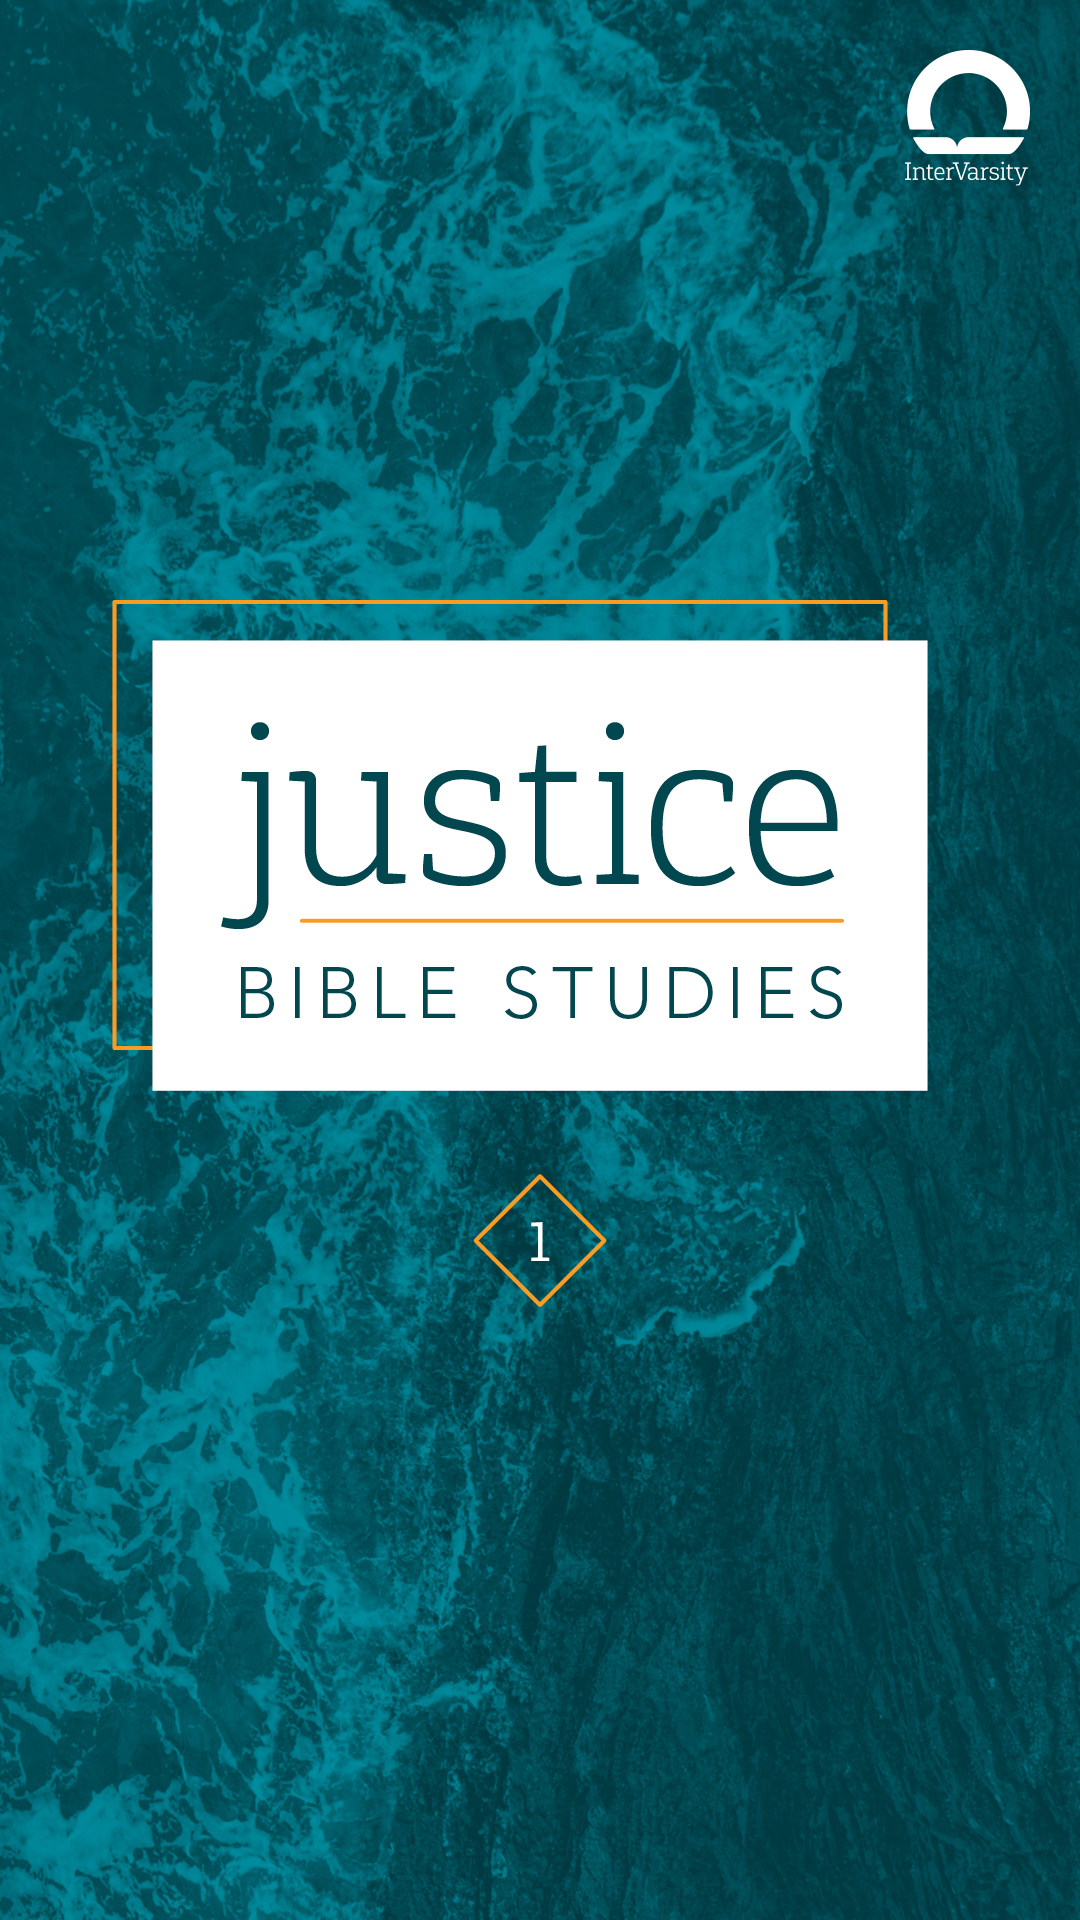 Justice Bible Studies Social Media Weekly Ads study 1 story